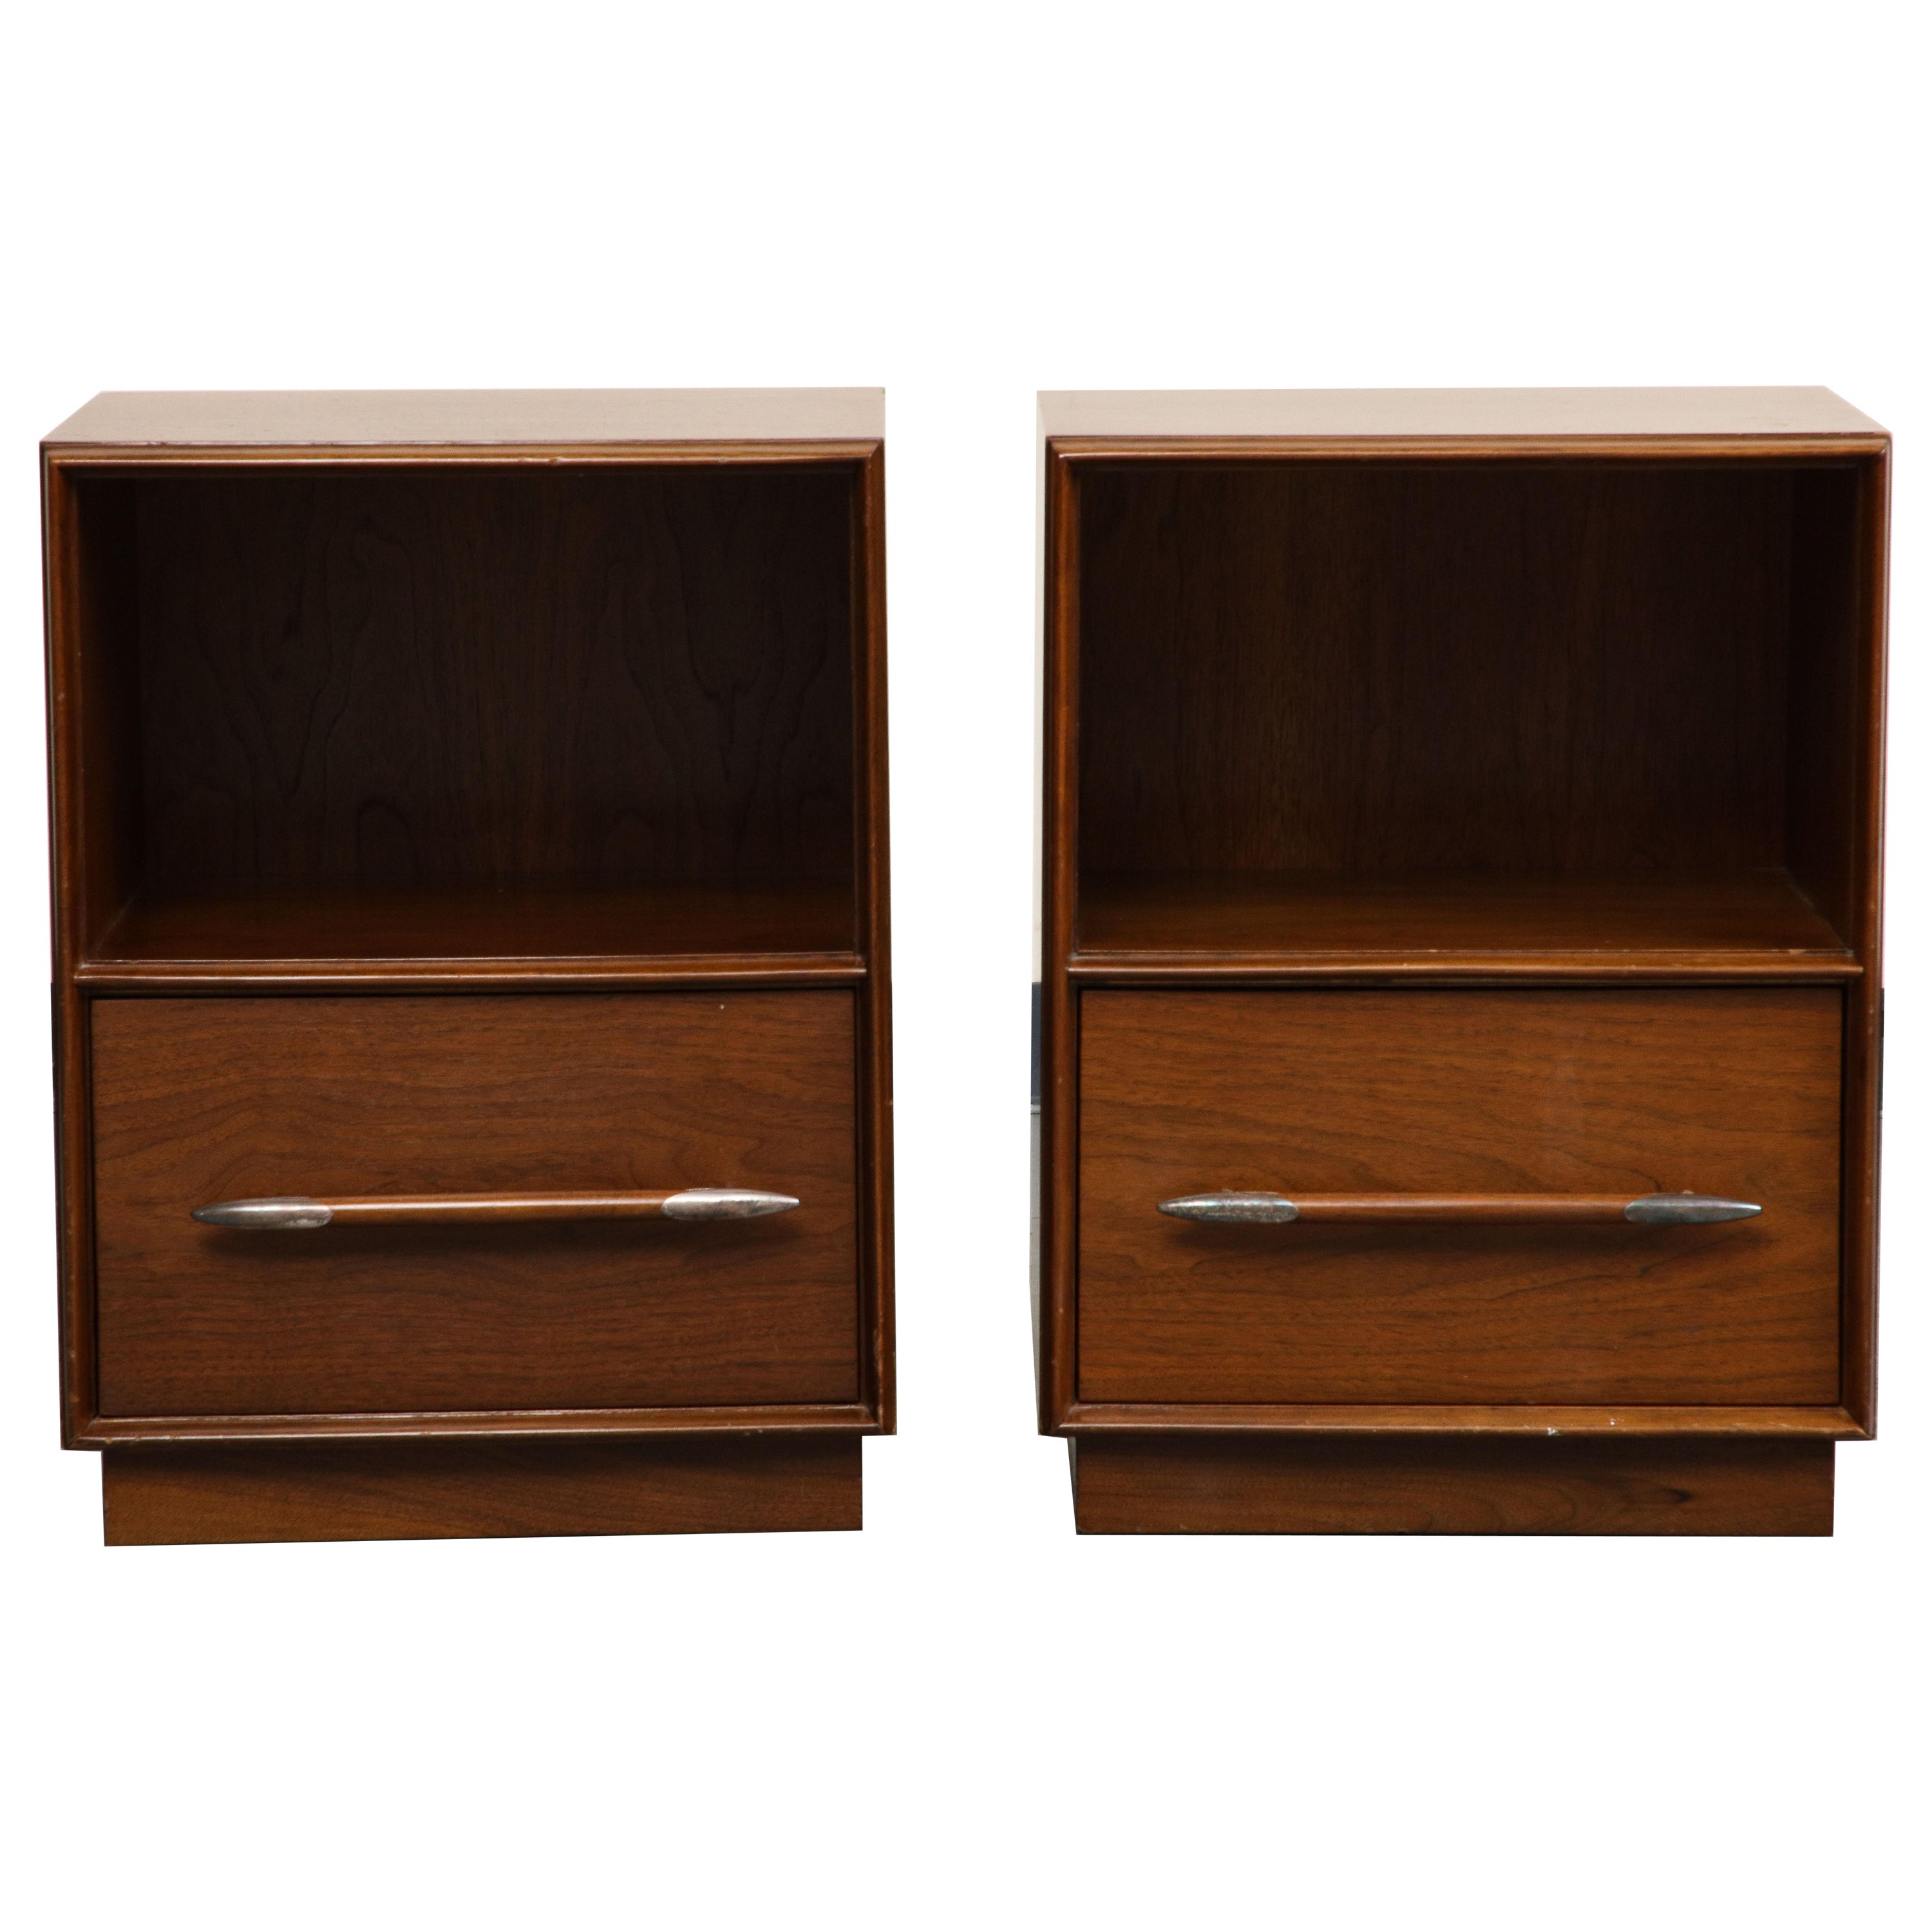 Pair of 1950s Walnut Nightstands or End Tables, Robsjohn-Gibbings for Widdicomb For Sale